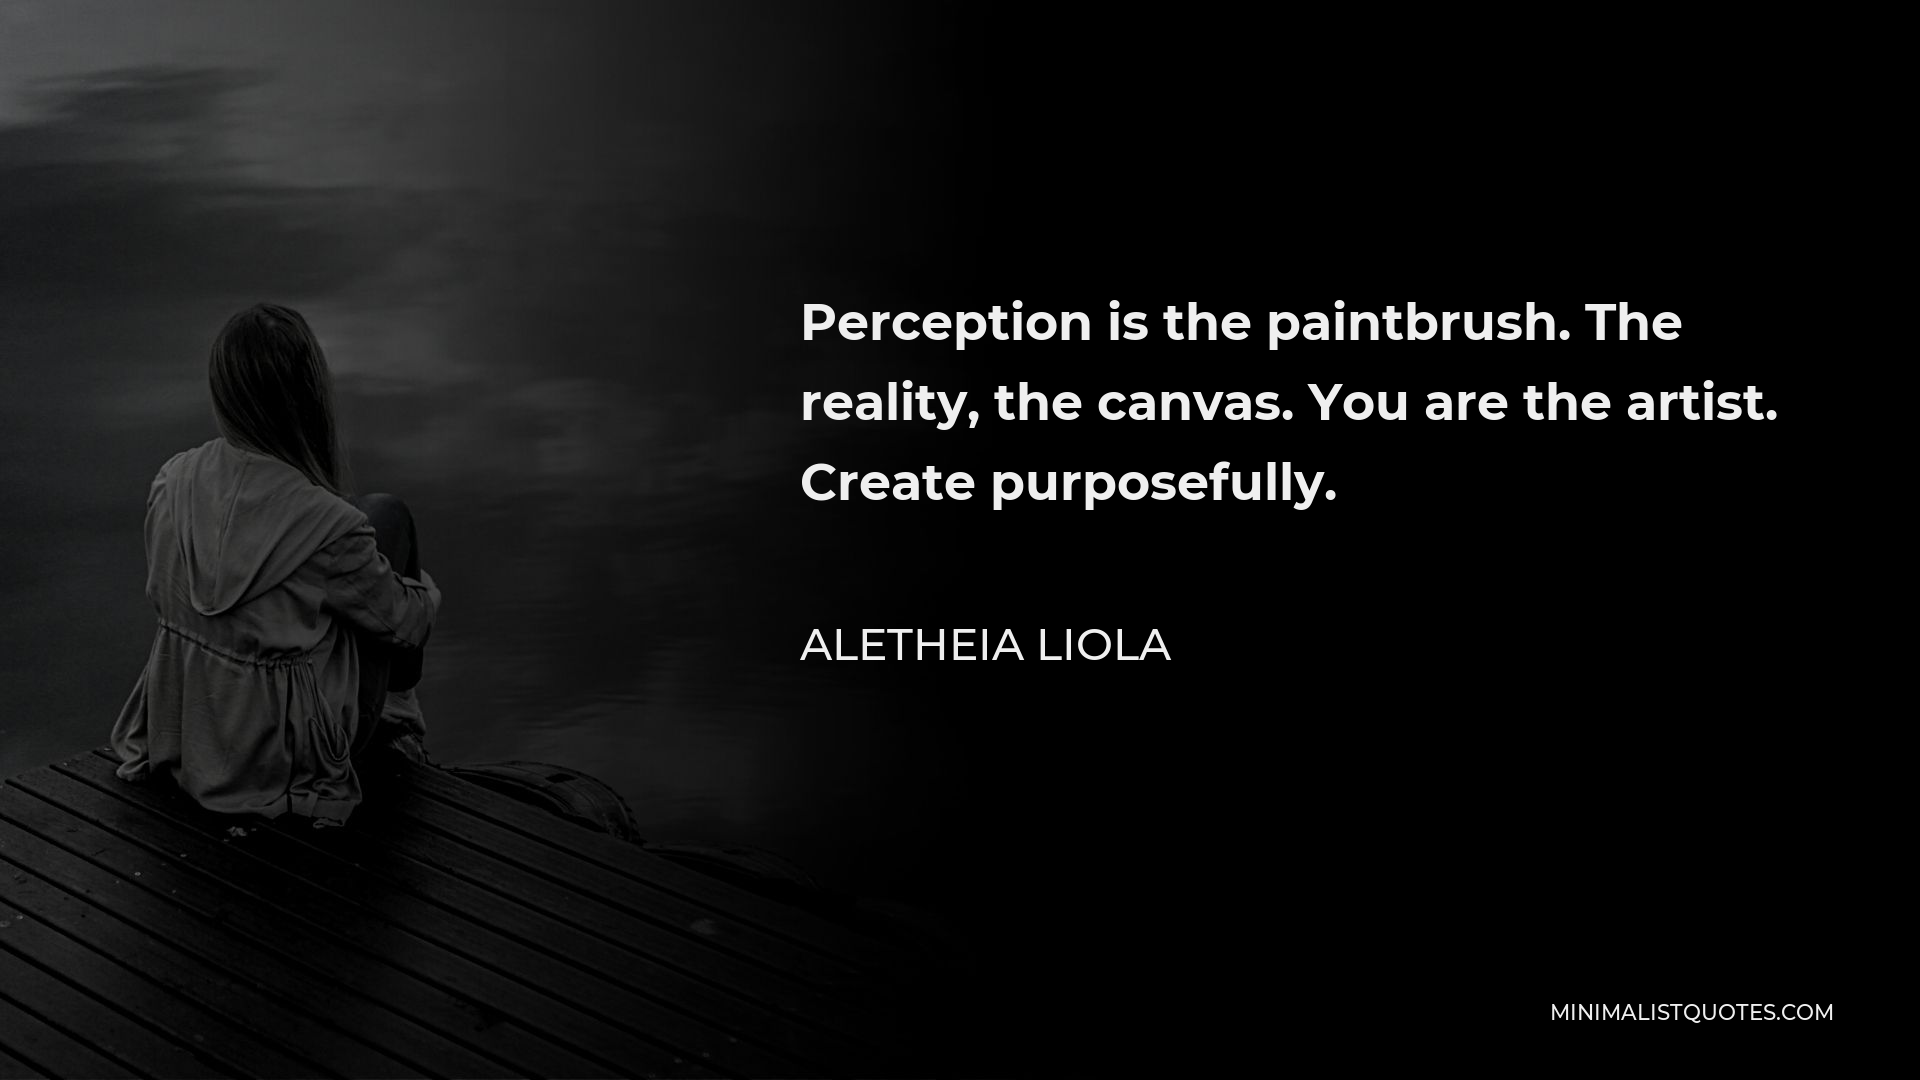 Aletheia Liola Quote - Perception is the paintbrush. The reality, the canvas. You are the artist. Create purposefully.